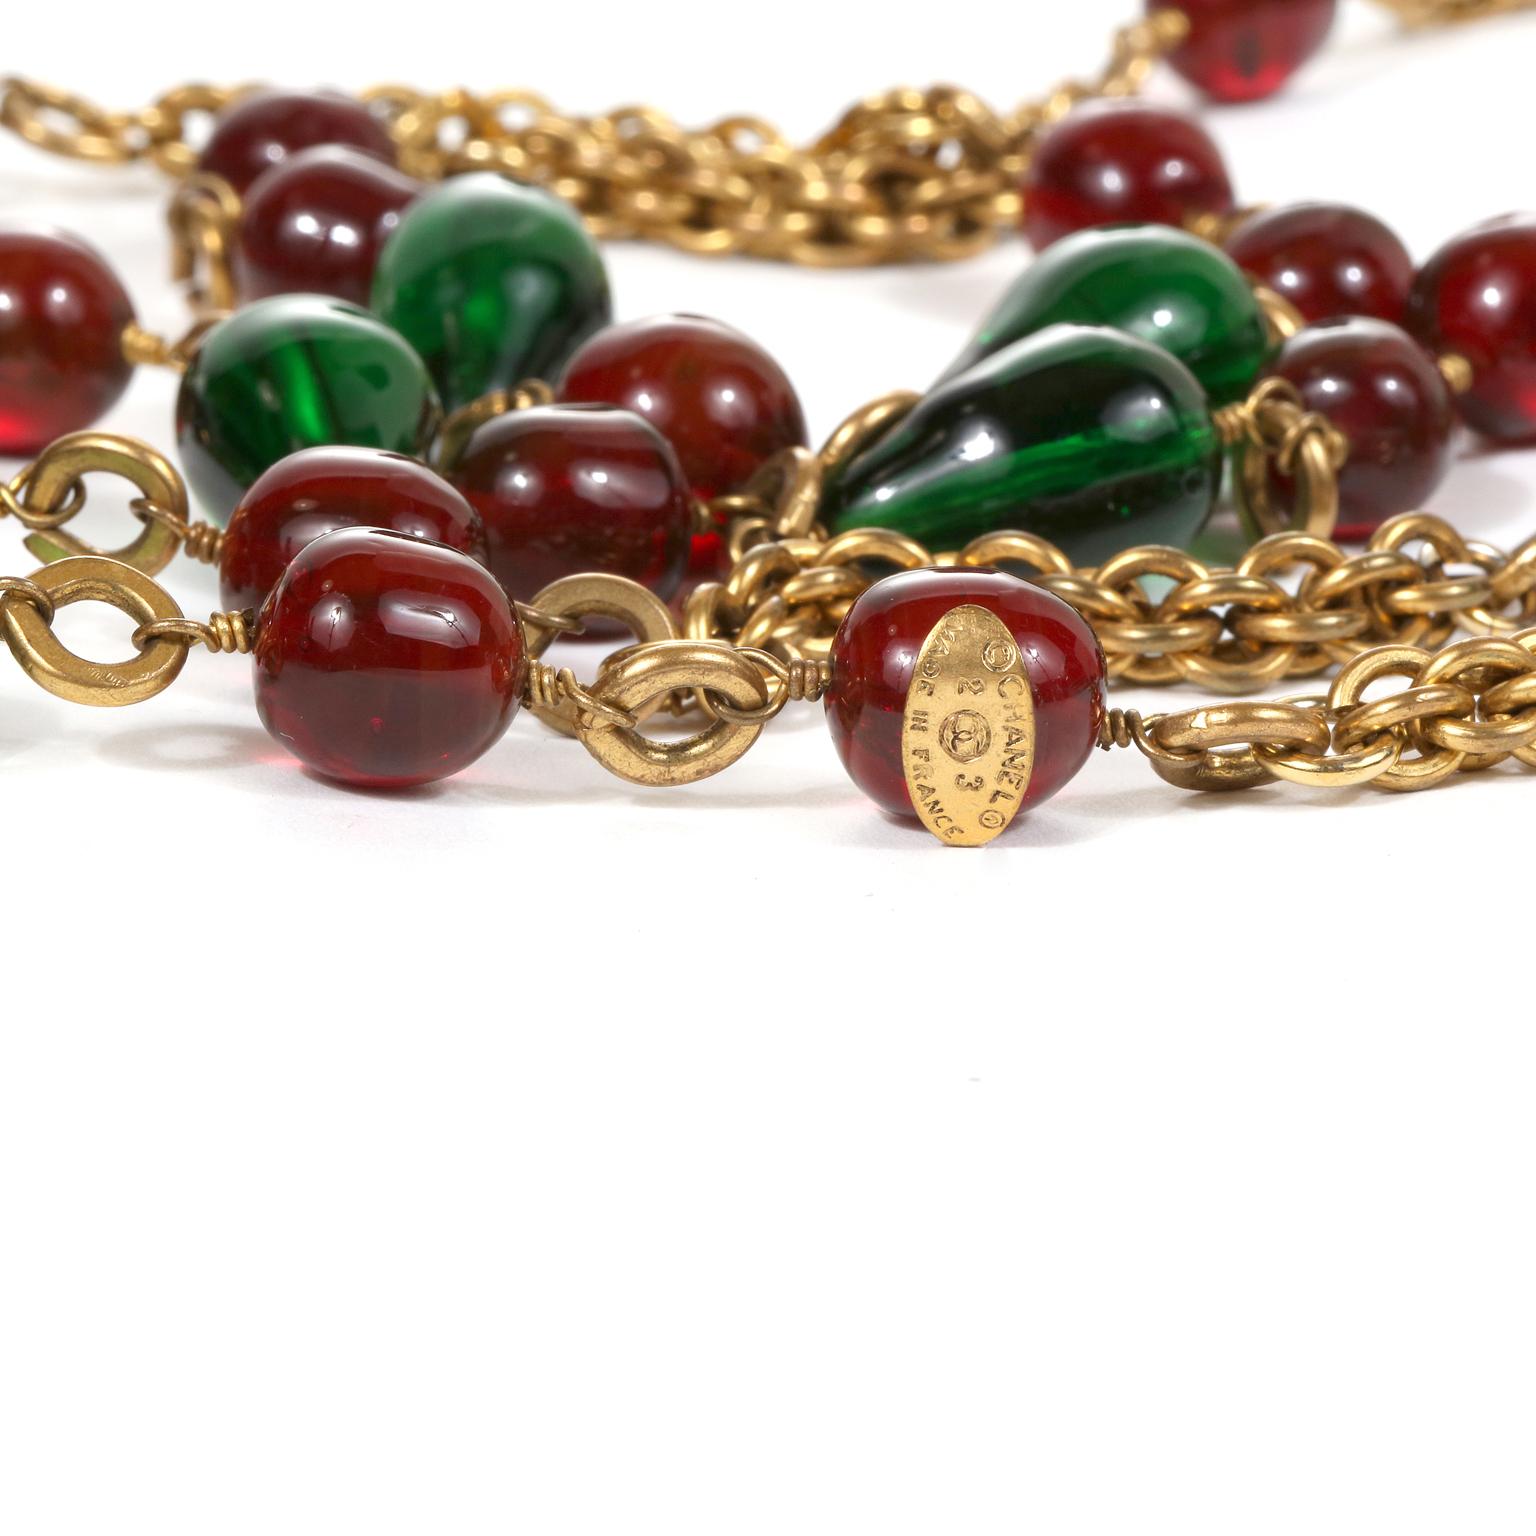 This authentic Chanel  Gripoix Gold Twist Chain is in excellent vintage condition from the mid 1980’s.  Red and green Gripoix glass stones are situated within a gold twisted extra long chain.  May be worn single or double.  70” length.  Made in